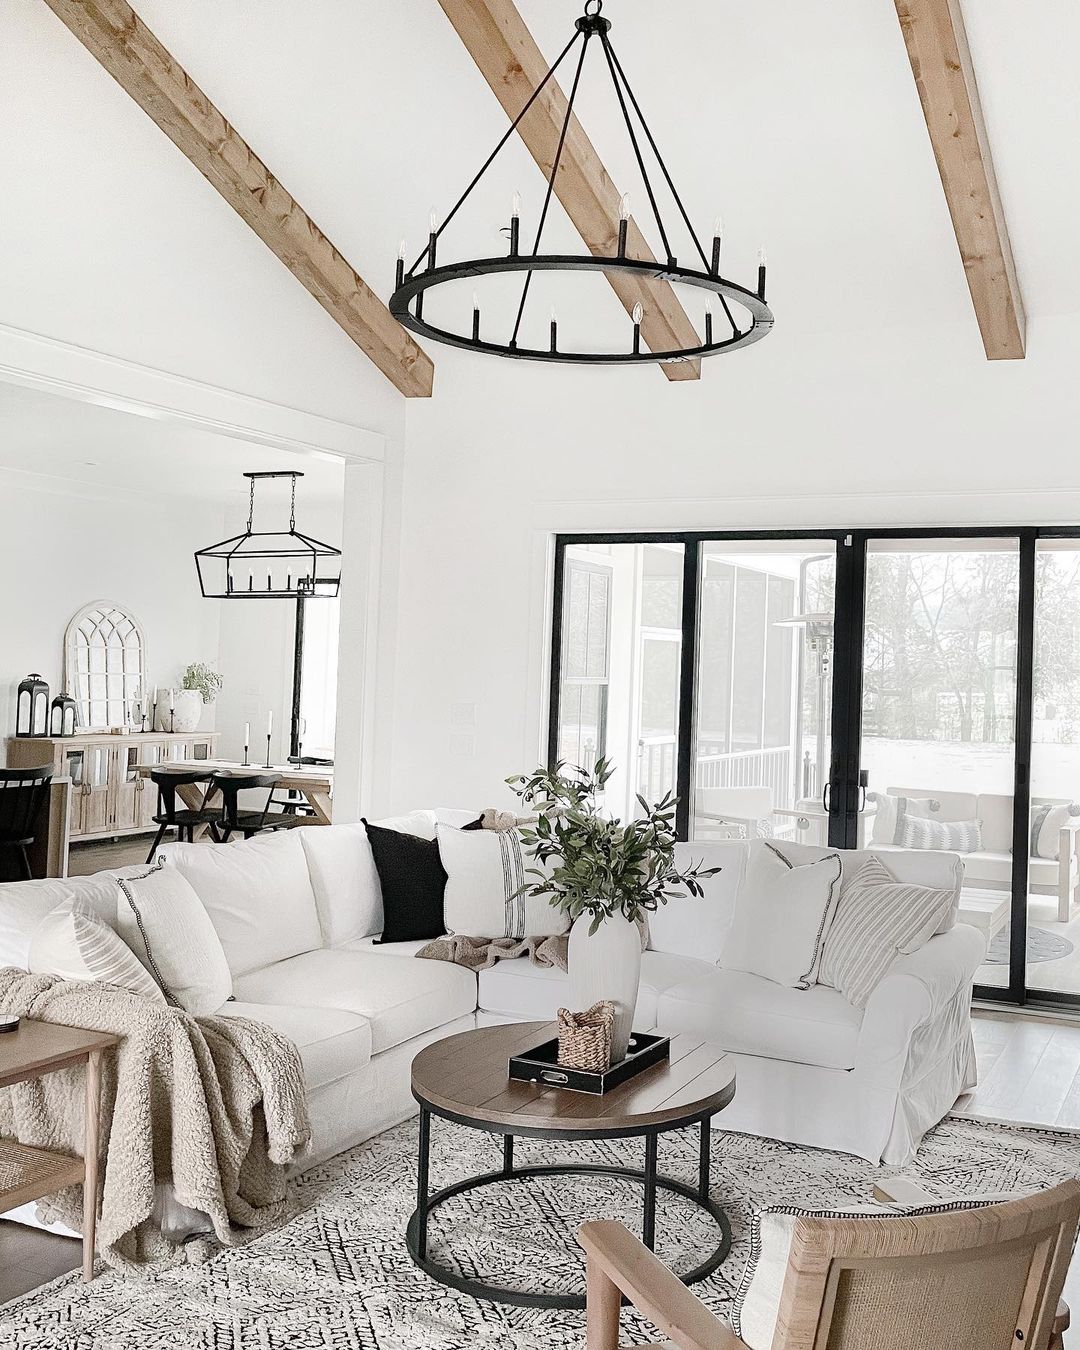 Farmhouse Style Living Room with Large White Sectional. Photo by Instagram user @practical.designs